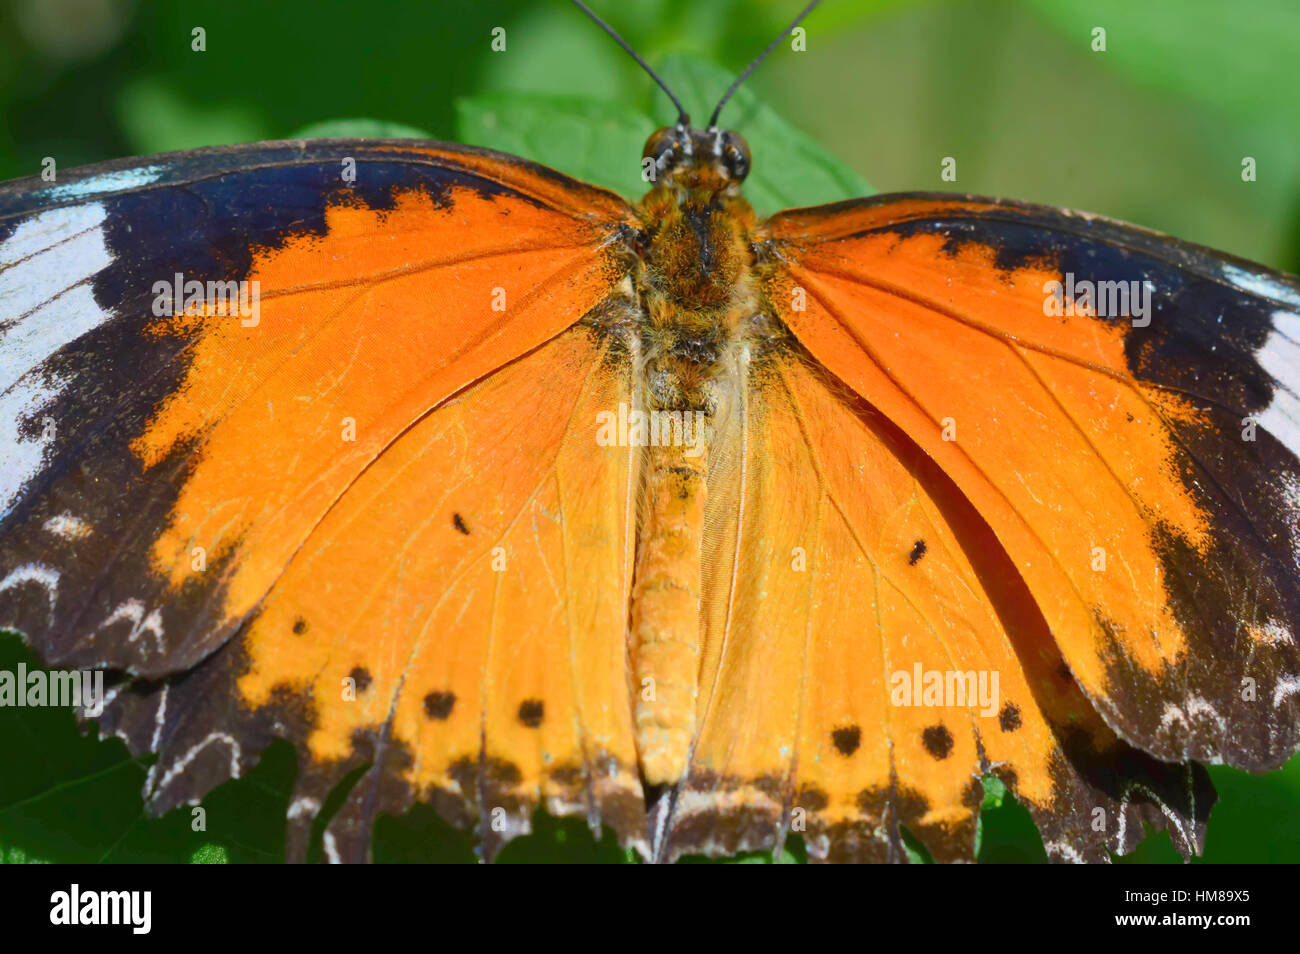 Common Lacewing Butterfly - This photo was taken at botanical garden in Illinois Stock Photo